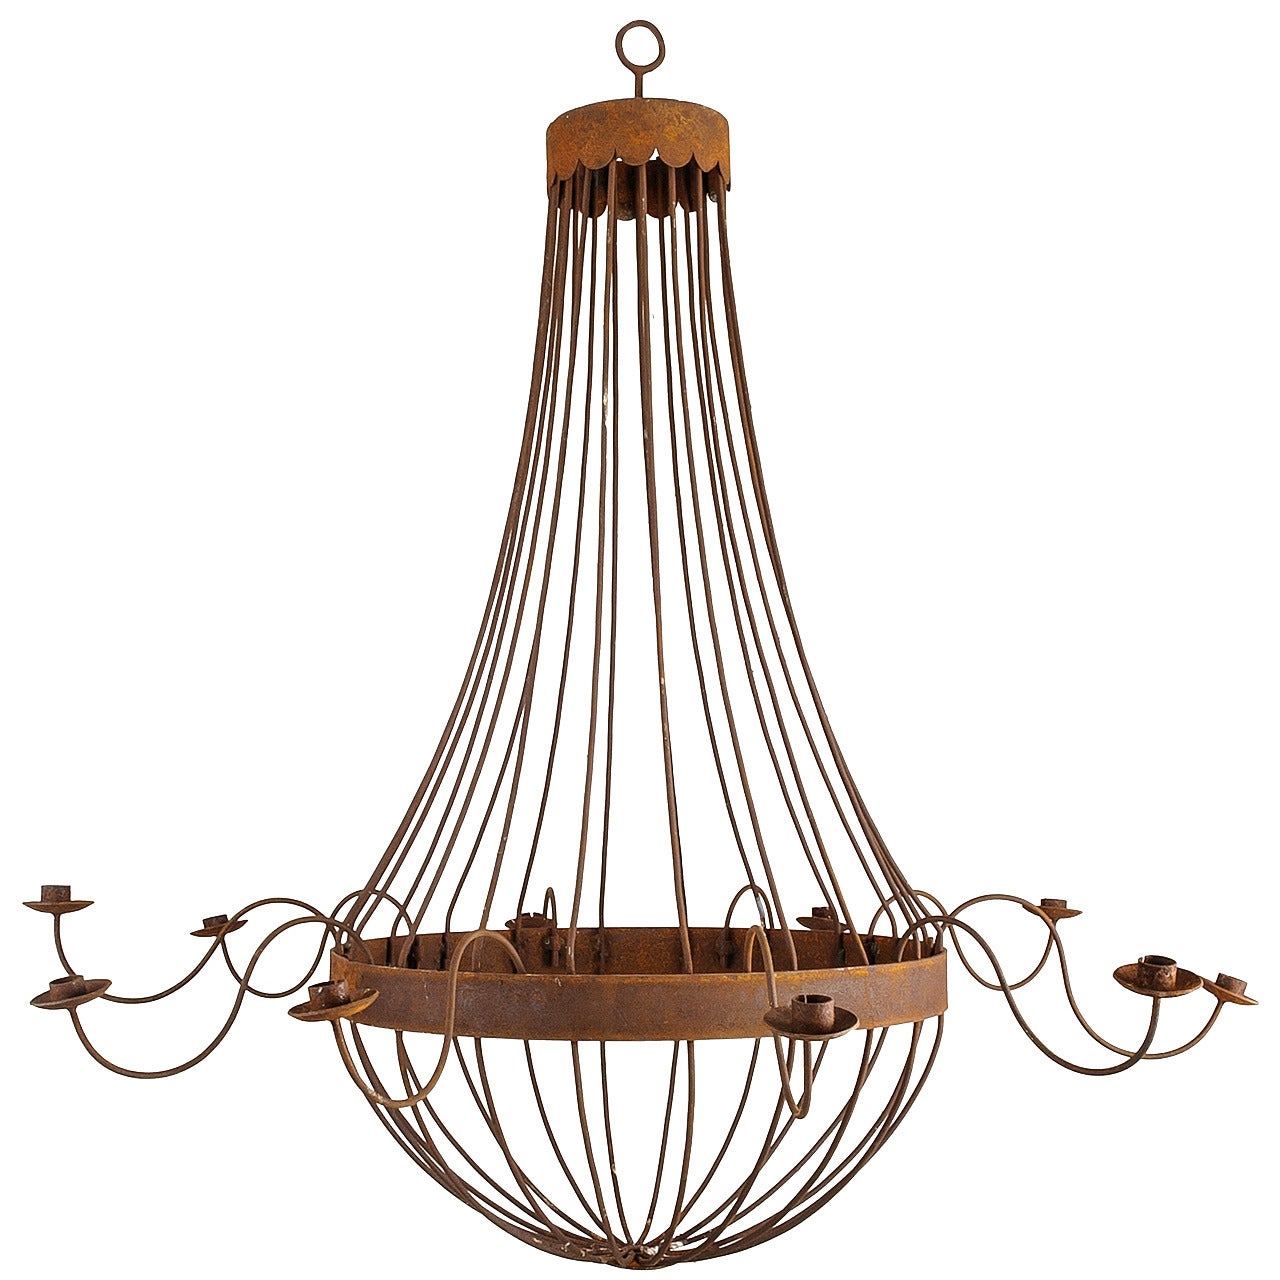 Grand French Bell Iron Chandelier with Ten Candles, Rusted Finish